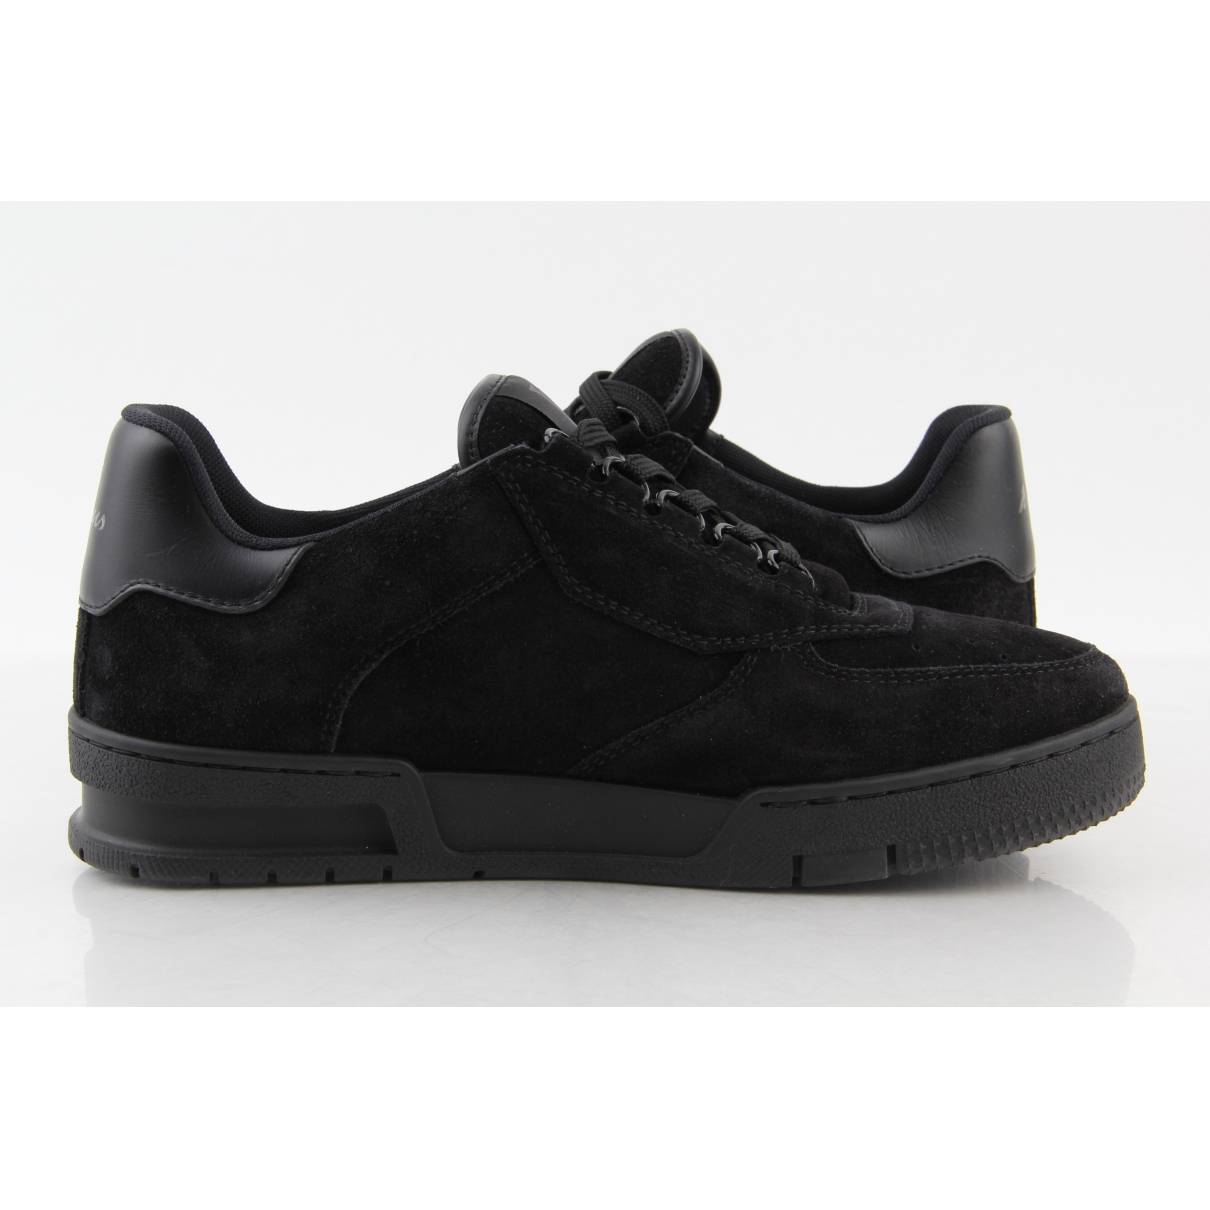 Lv trainer low trainers Louis Vuitton Black size 6 US in Suede - 32328135